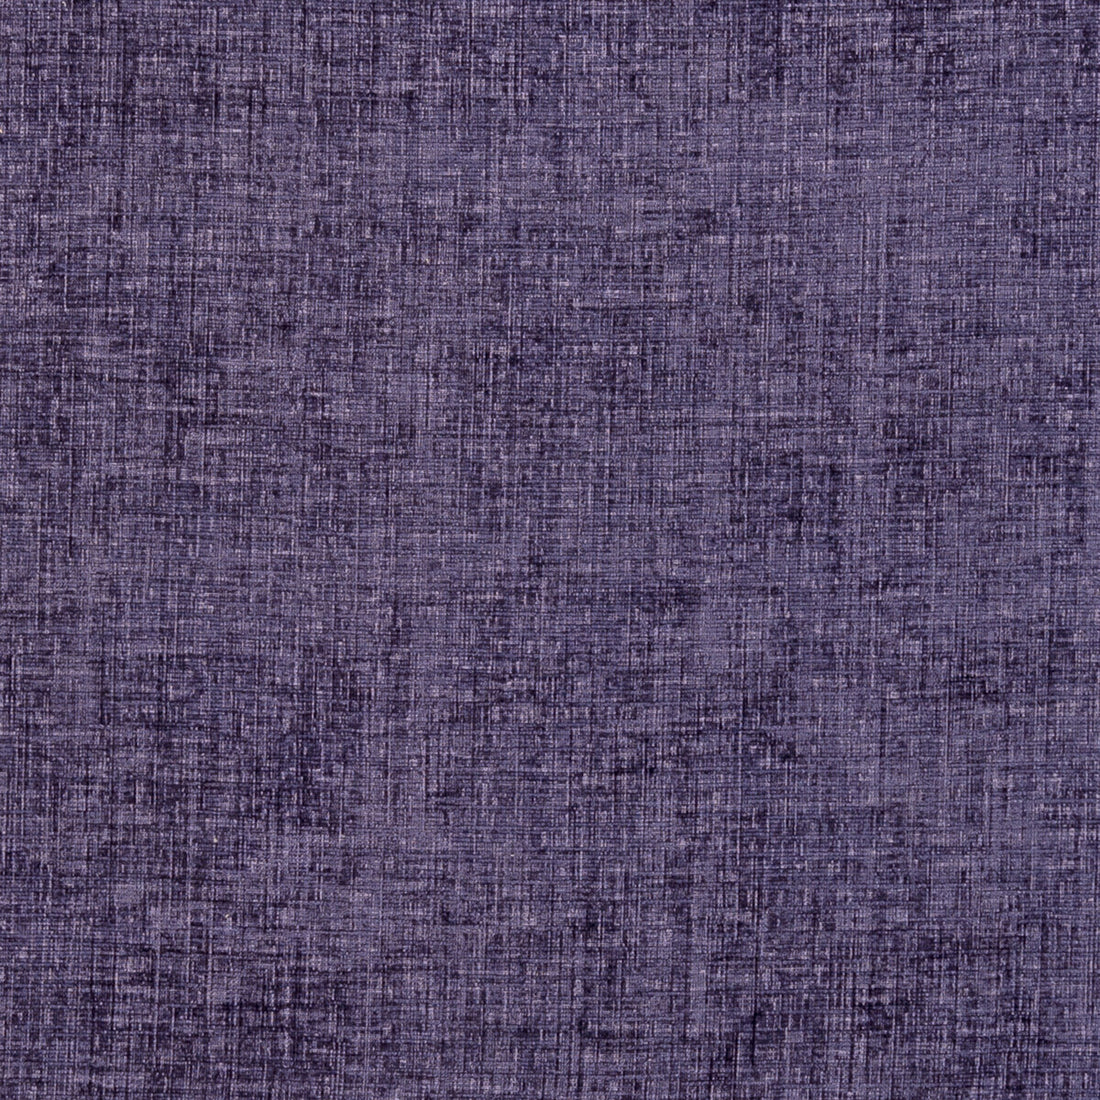 Karina fabric in aubergine color - pattern F0371/02.CAC.0 - by Clarke And Clarke in the Clarke &amp; Clarke Karina collection